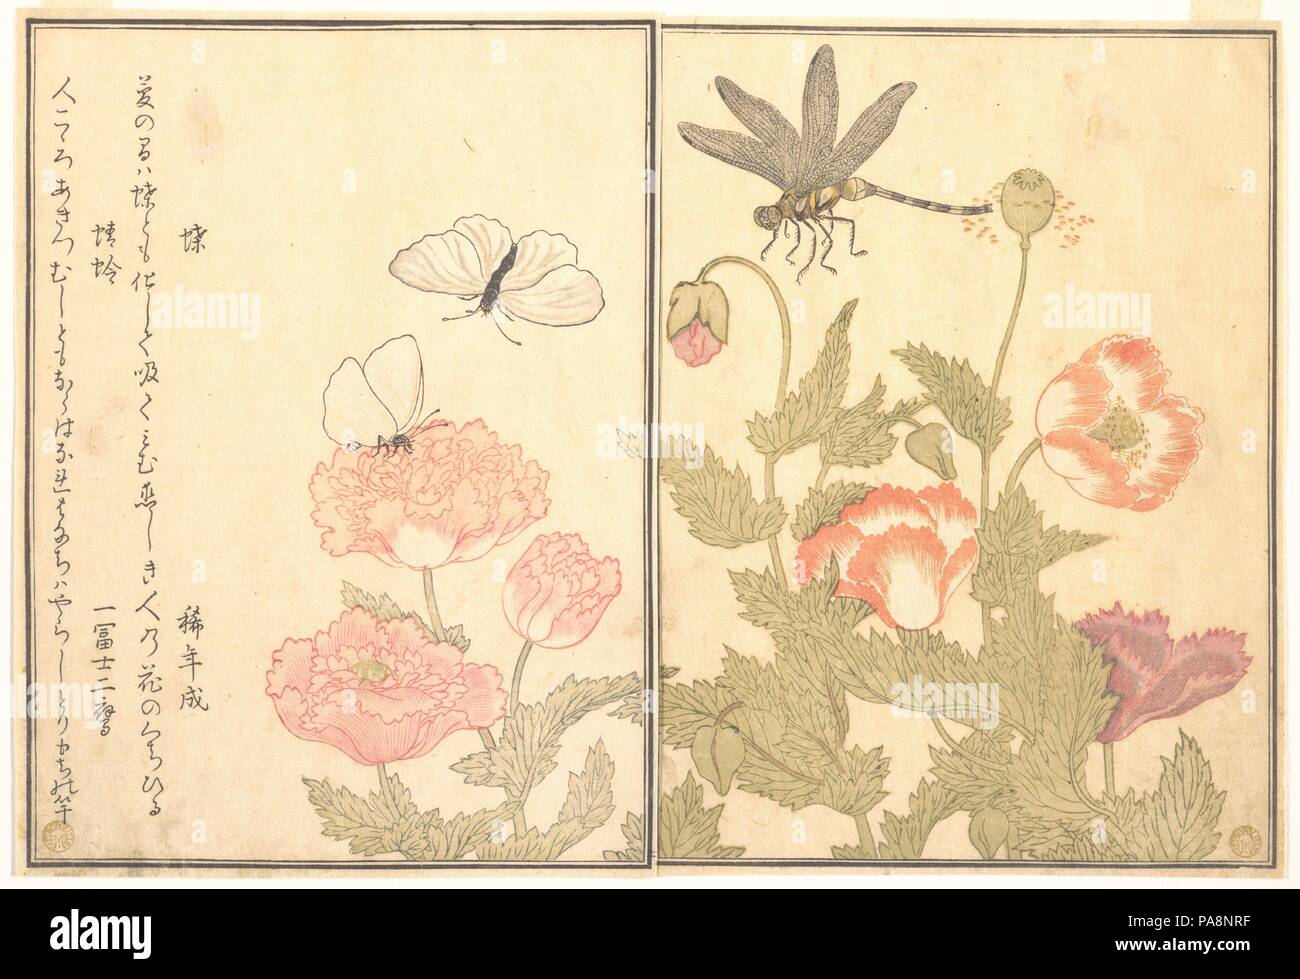 Butterfly (Cho); Dragonfly (Kagero or Tonbo), from the Picture Book of Crawling Creatures (Ehon mushi erami). Artist: Kitagawa Utamaro (Japanese, ca. 1754-1806). Culture: Japan. Dimensions: 10 1/2 x 7 1/4 in. (26.7 x 18.4 cm). Date: 1788.  Ehon mushi erami (Picture Book of Crawling Creatures) is illustrated with fifteen designs of insects and other garden creatures by Utamaro. Published by Tsutaya Juzaburo , the poems were selected and introduced by a preface written by the poet and scholar Yadoya no Meshimori (Rokujuen; 1753-1830), who later became head of the influential Go-gawa poetry group Stock Photo